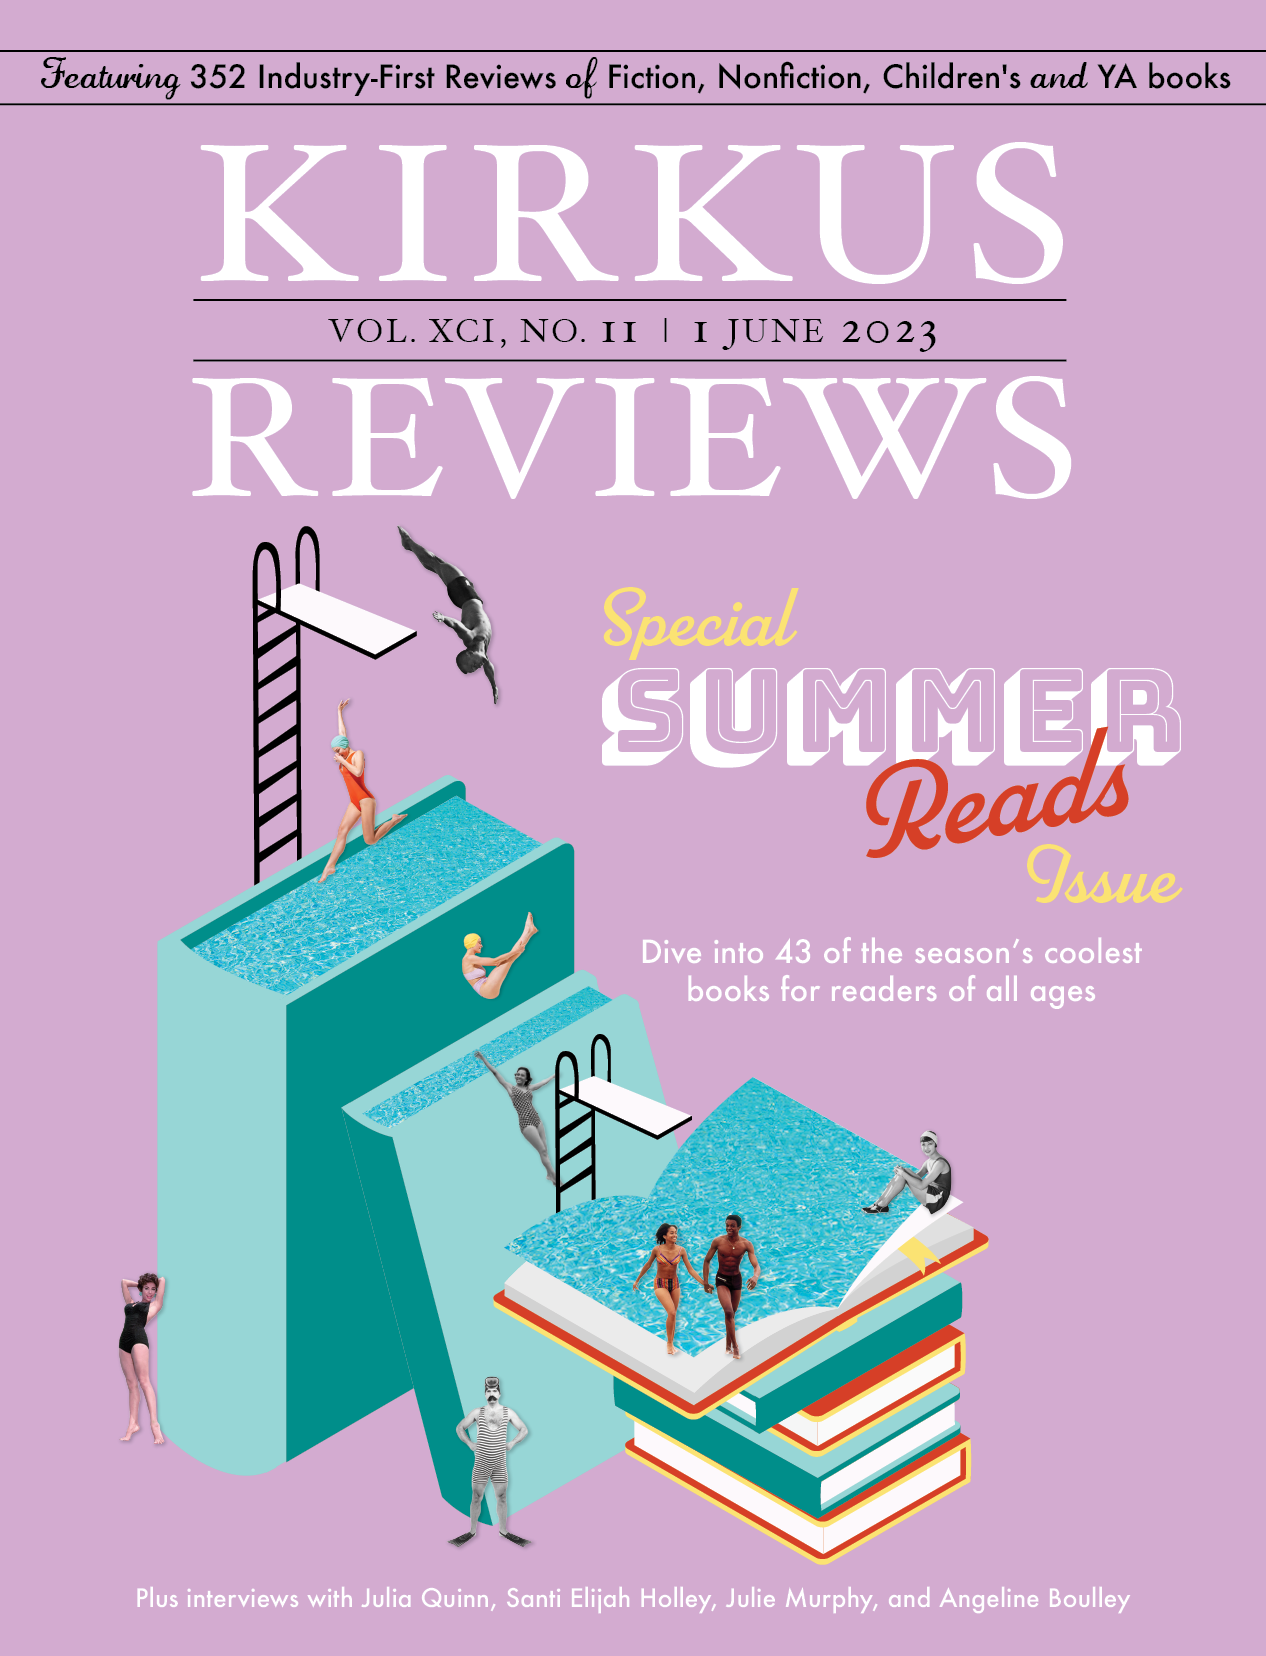 Special Summer Reads Issue 2023